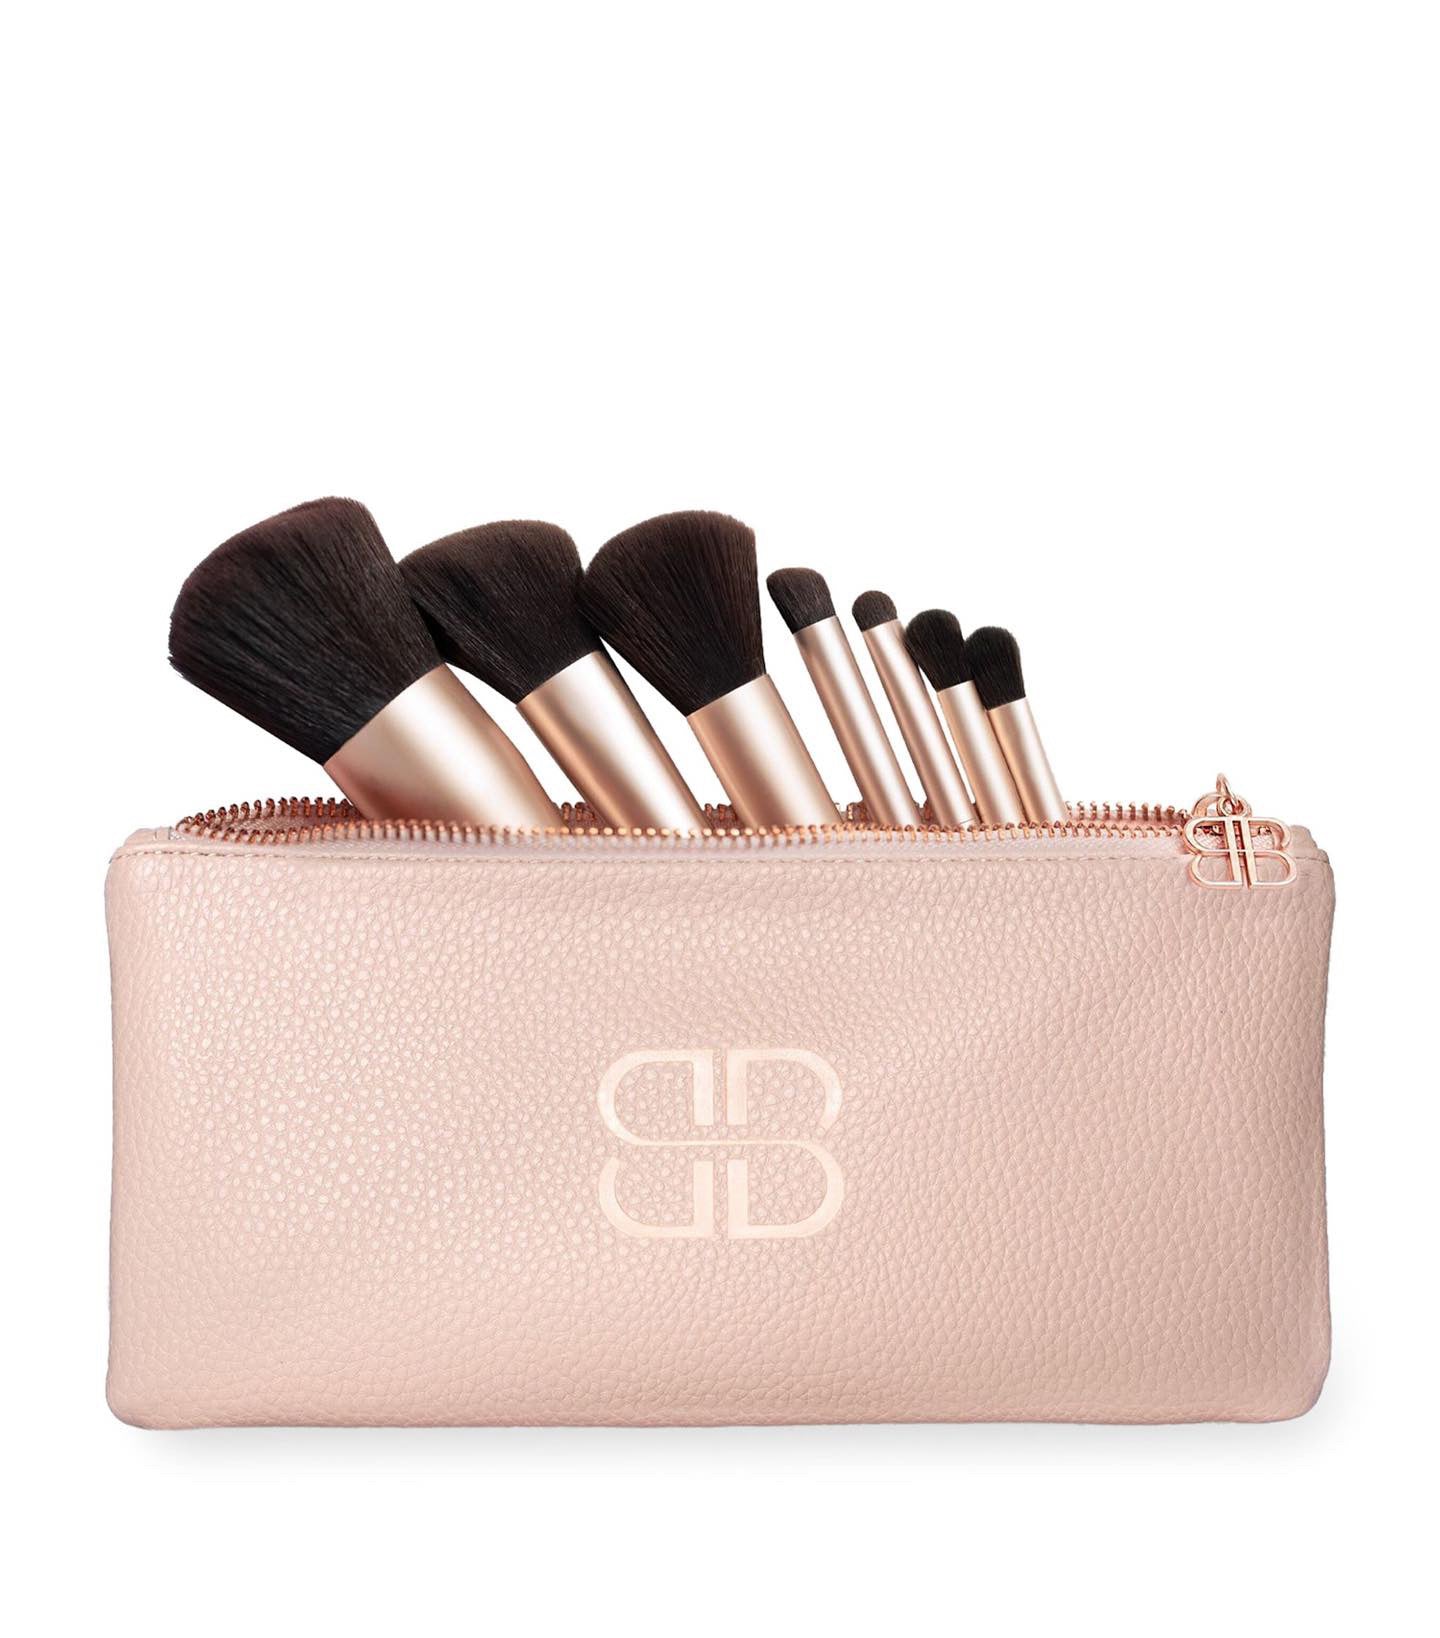 BEAUTIFECT, COMPLETE BRUSH COLLECTION